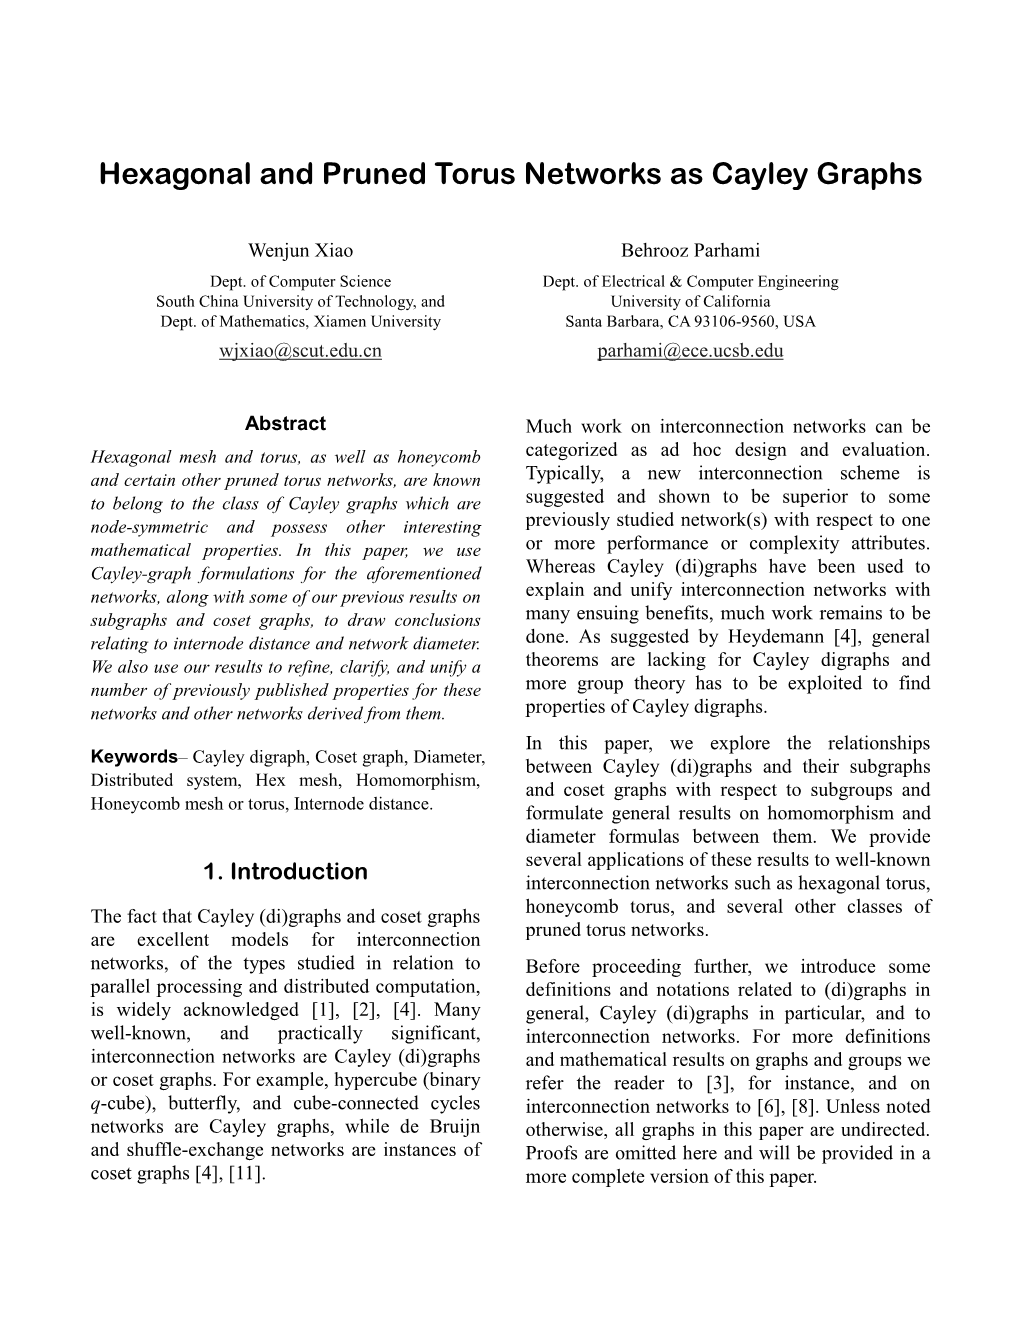 Hexagonal and Pruned Torus Networks As Cayley Graphs